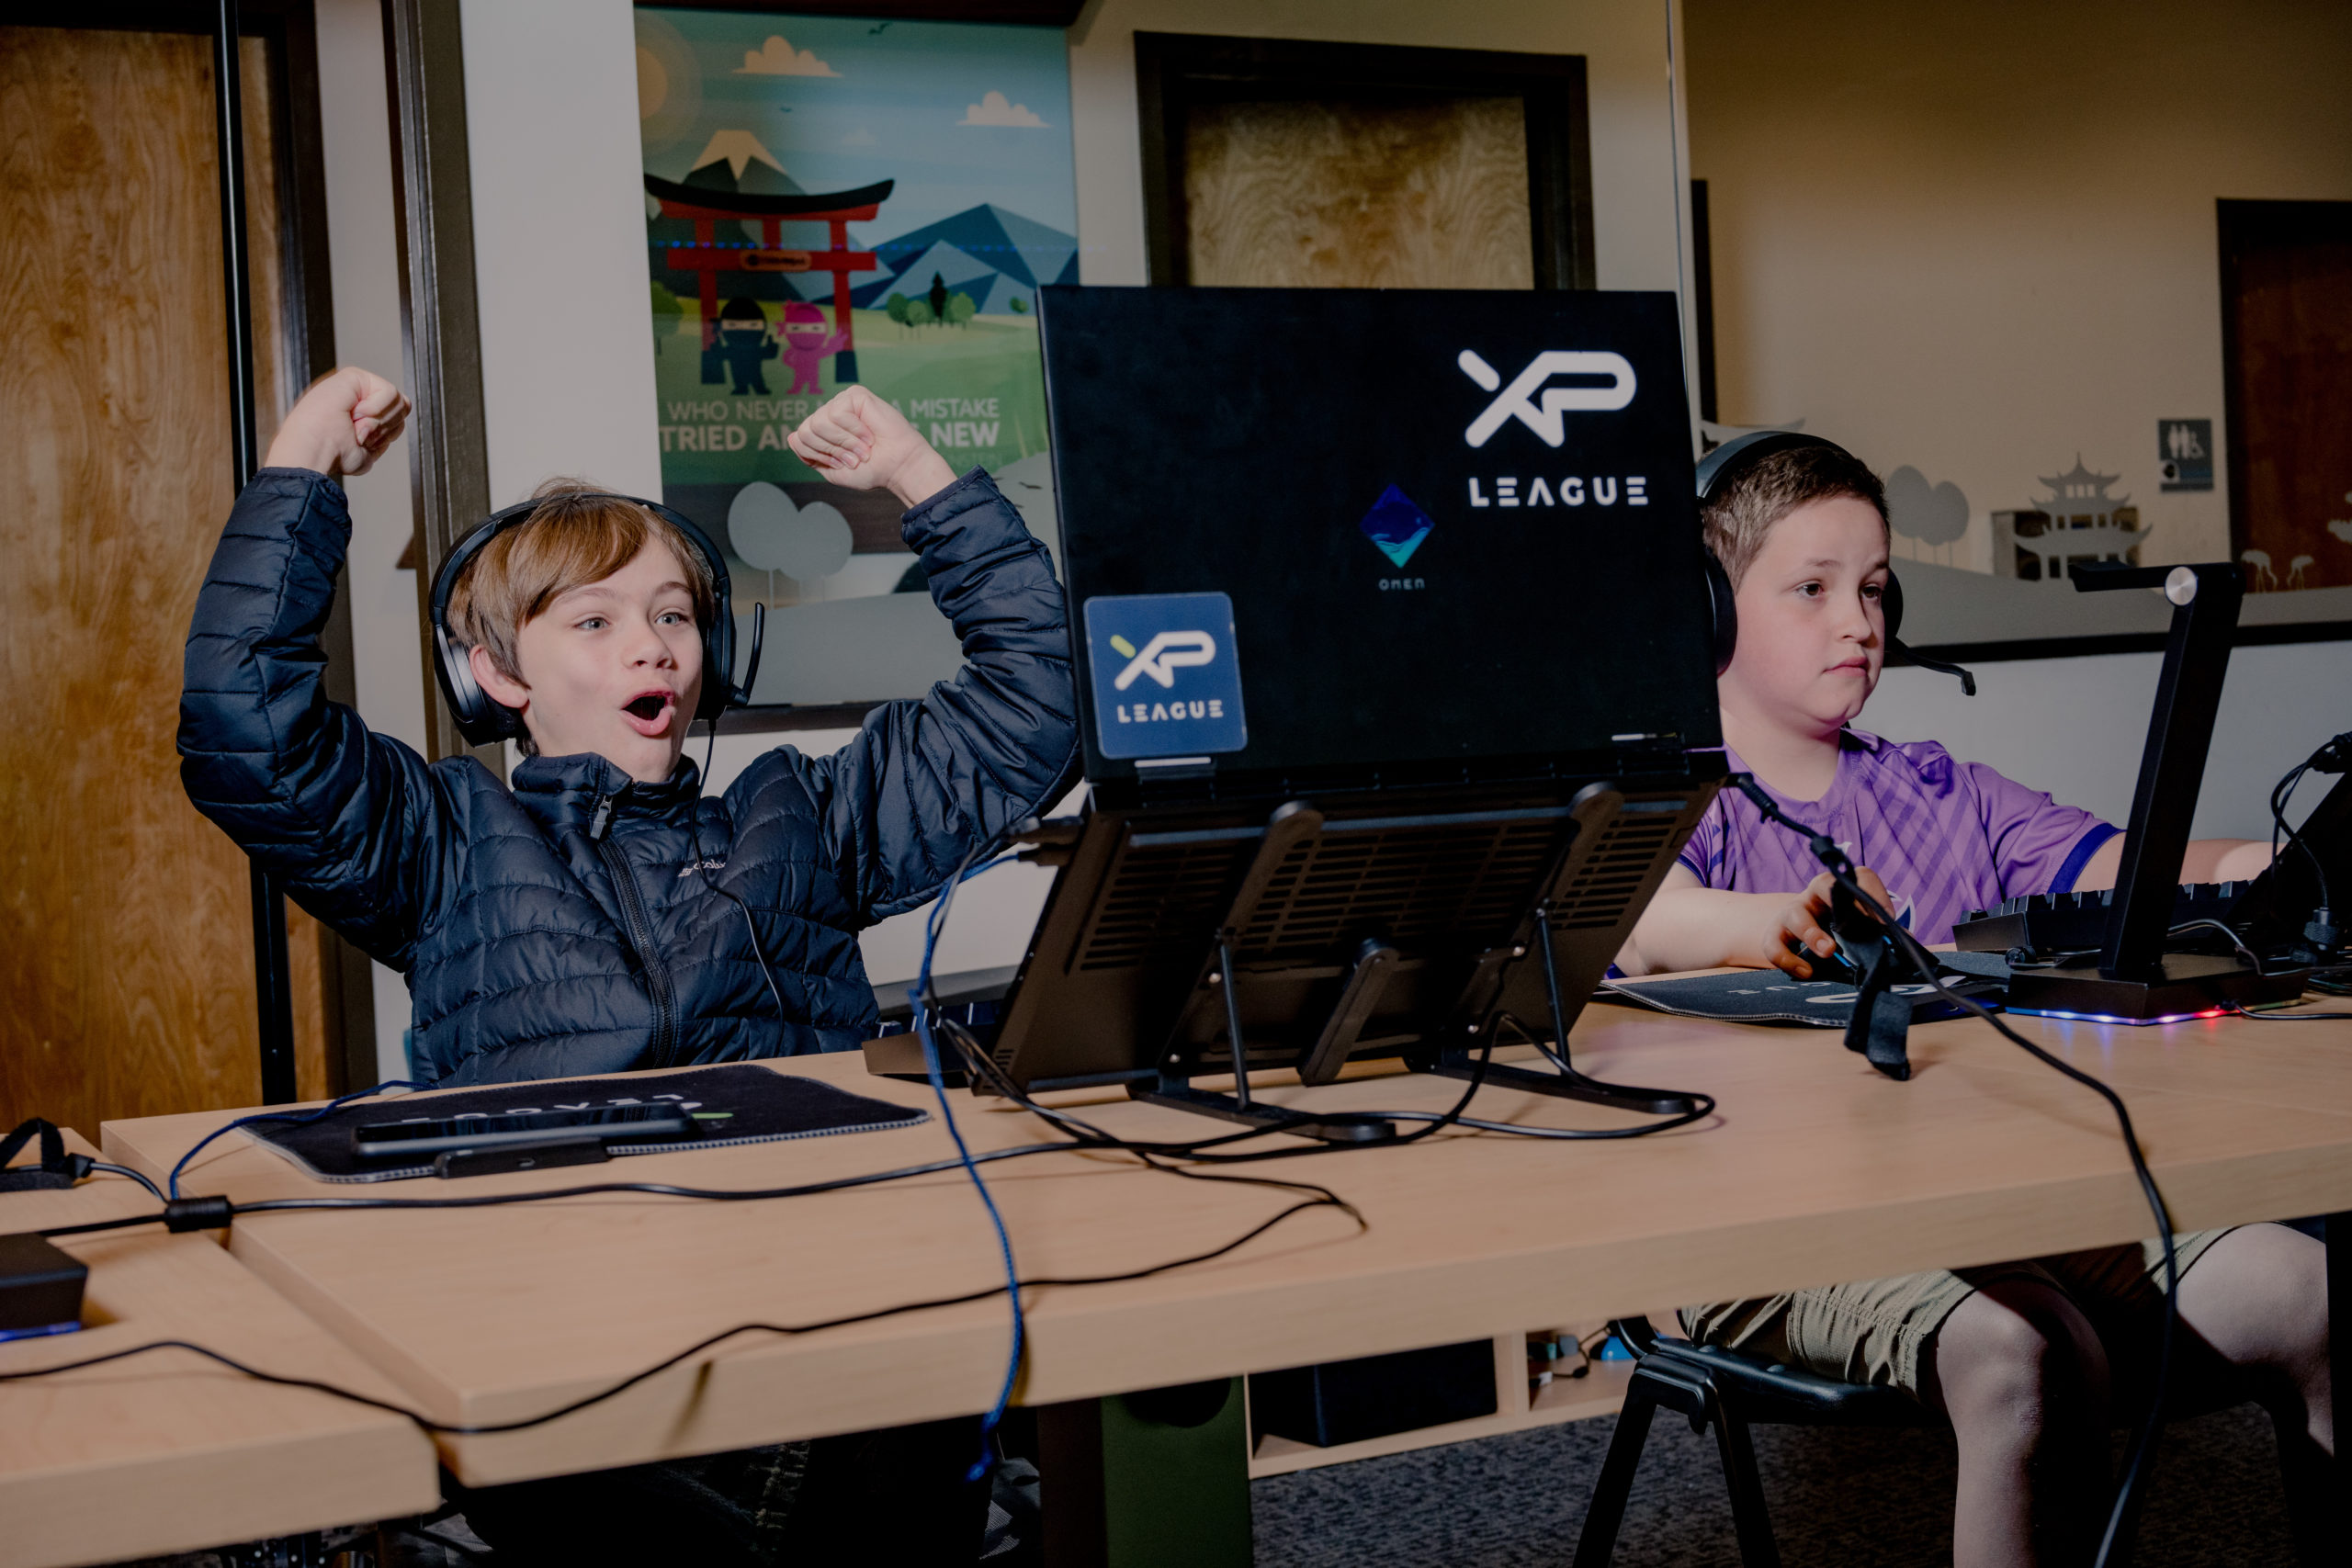 In XP League, young gamers are flourishing as esports players